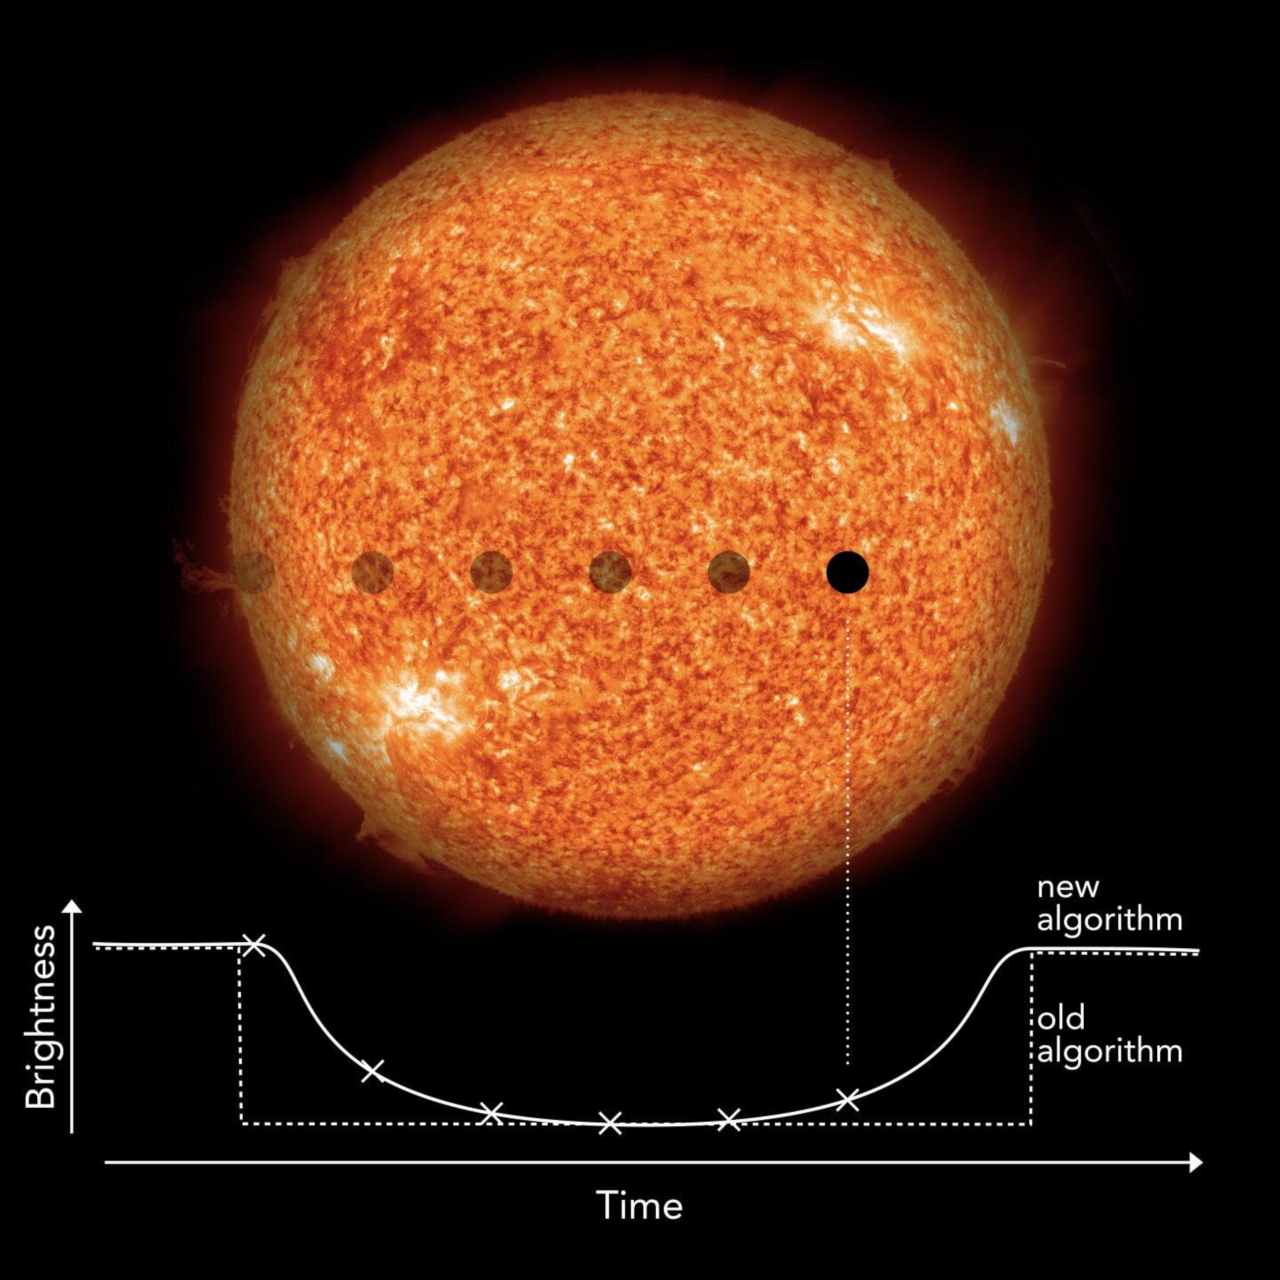 The new algorithm doesn't look at abrupt drops in brightness like previous standard algorithms, but for the characteristic, gradual dimming and recovery. This makes the new transit search algorithm much more sensitive to smaller exoplanets. Image: NASA